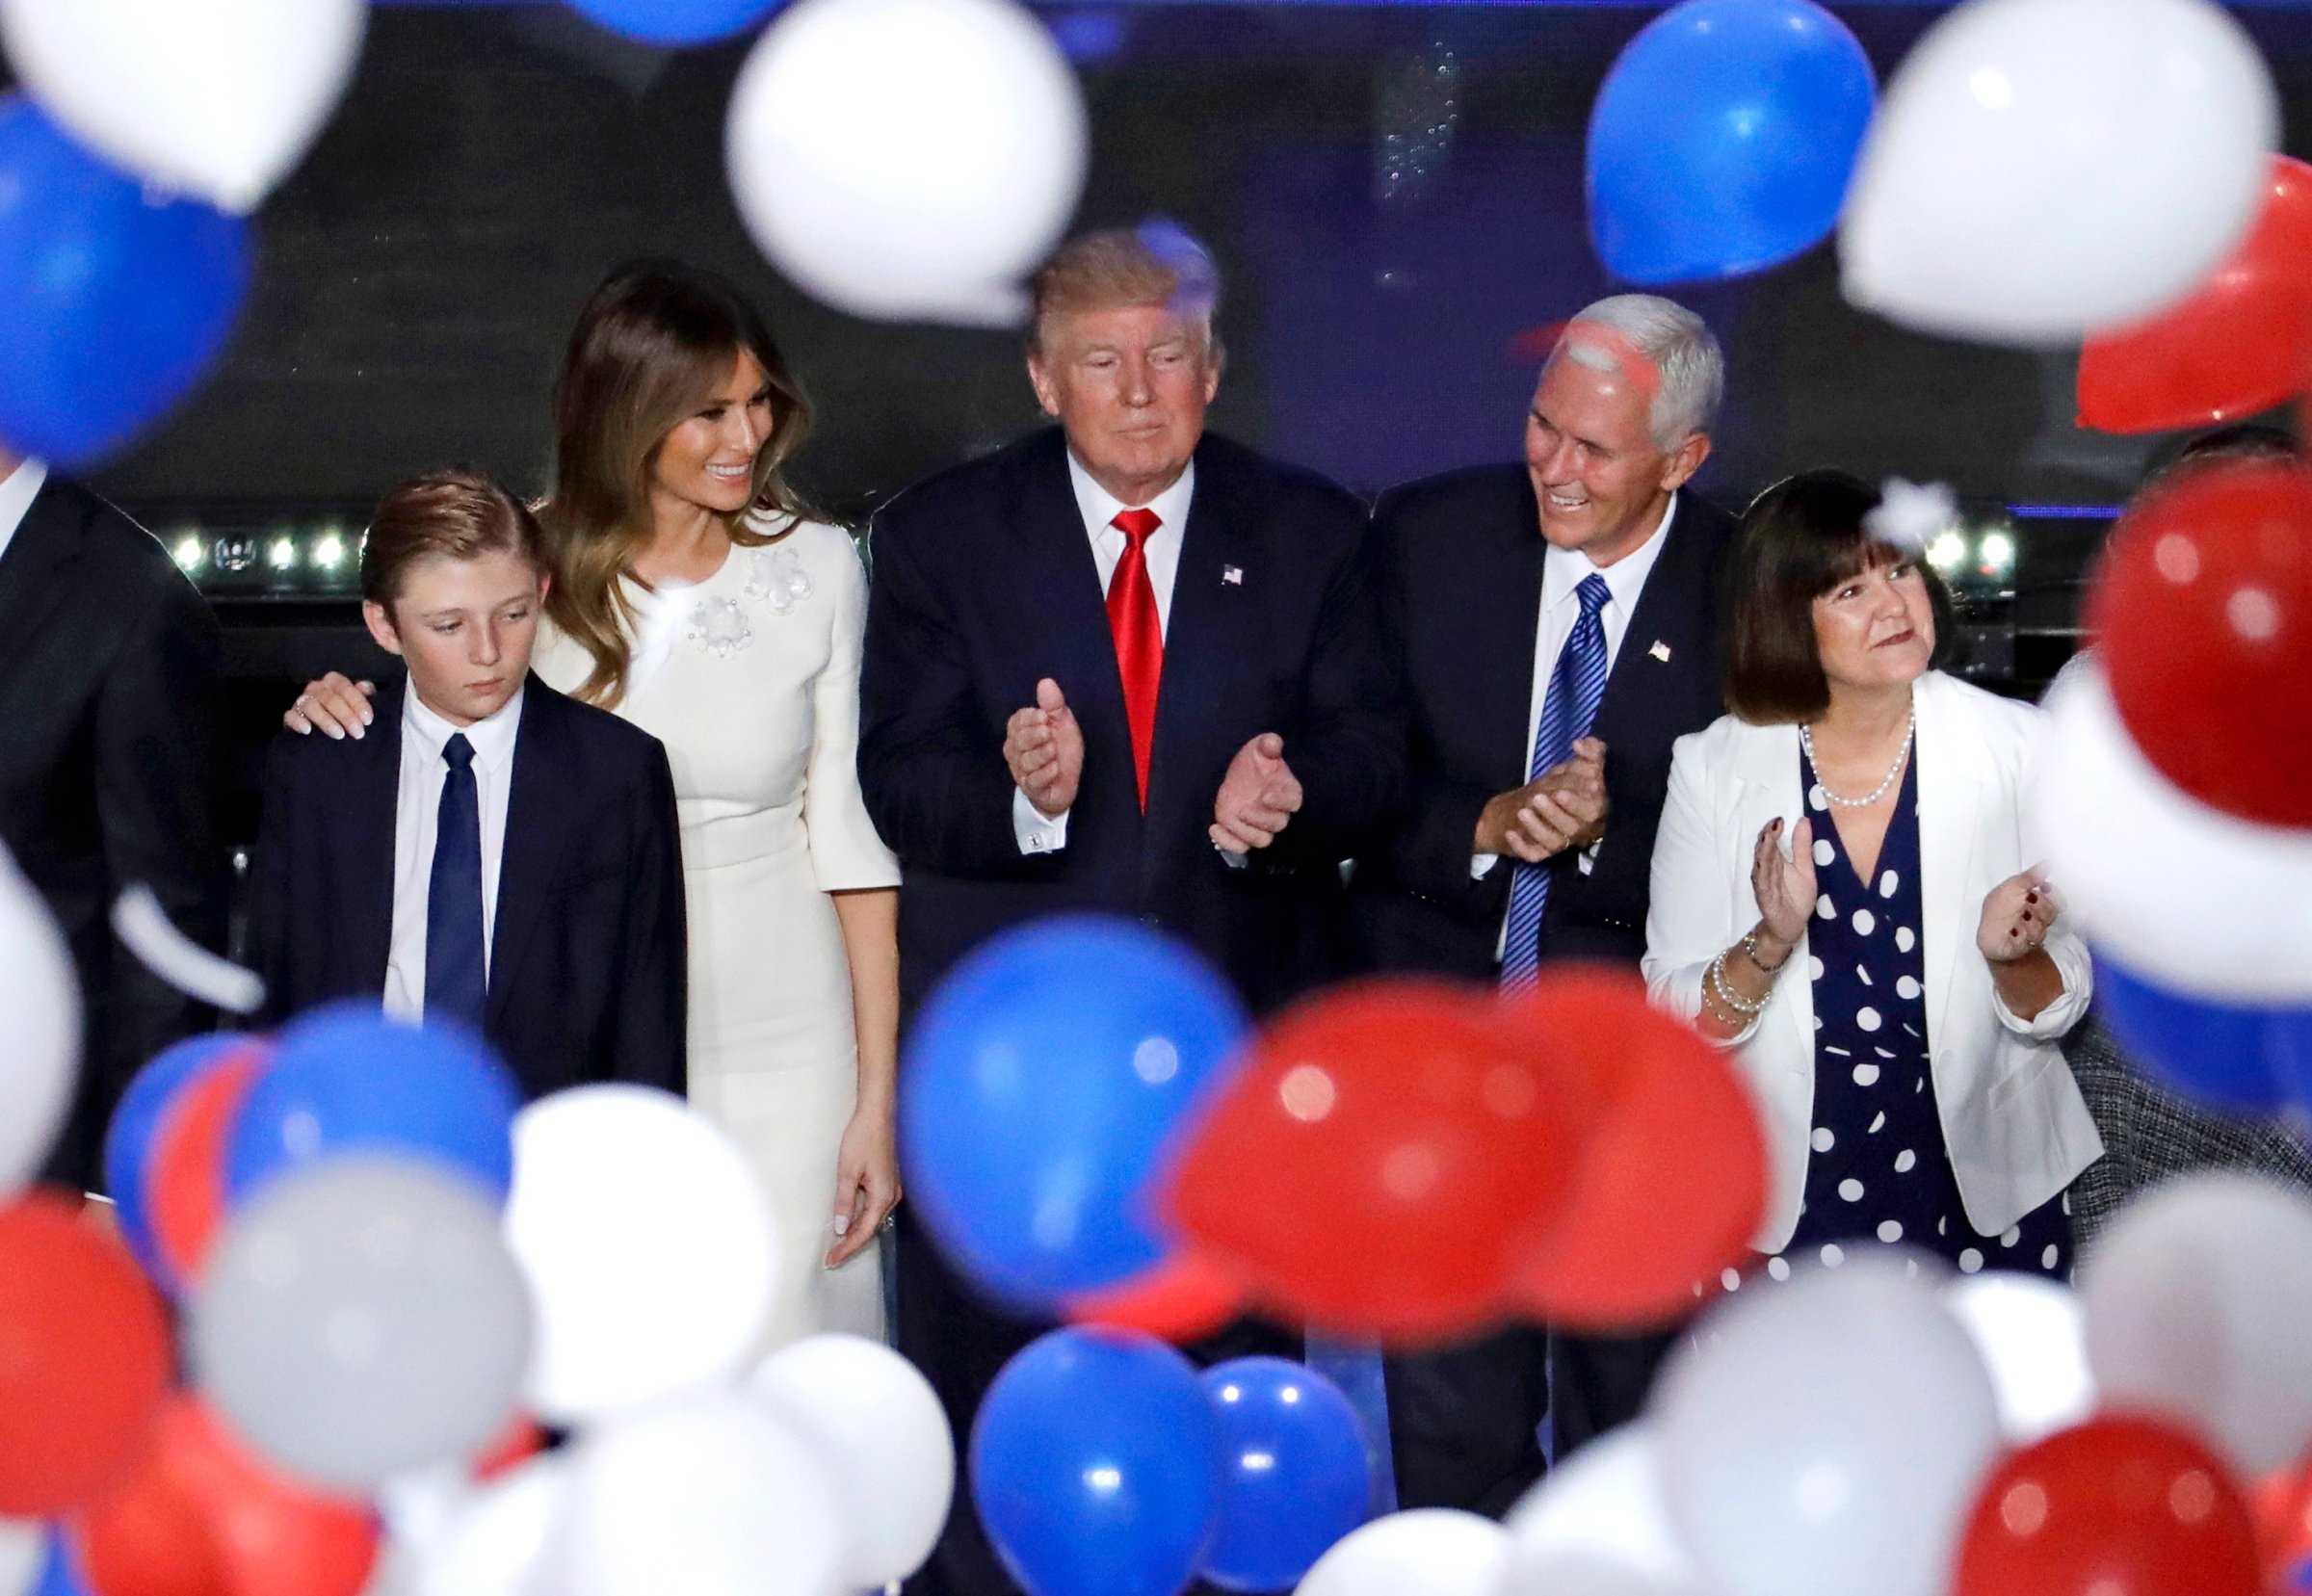 Republican presidential candidate Donald Trump, center, along with, from left, son Barron, wife Melania, Gov. Mike Pence of Indiana and Pence's wife Karen after Trump's address to delegates during the final day session of the Republican National Convention in Cleveland, July 21, 2016.